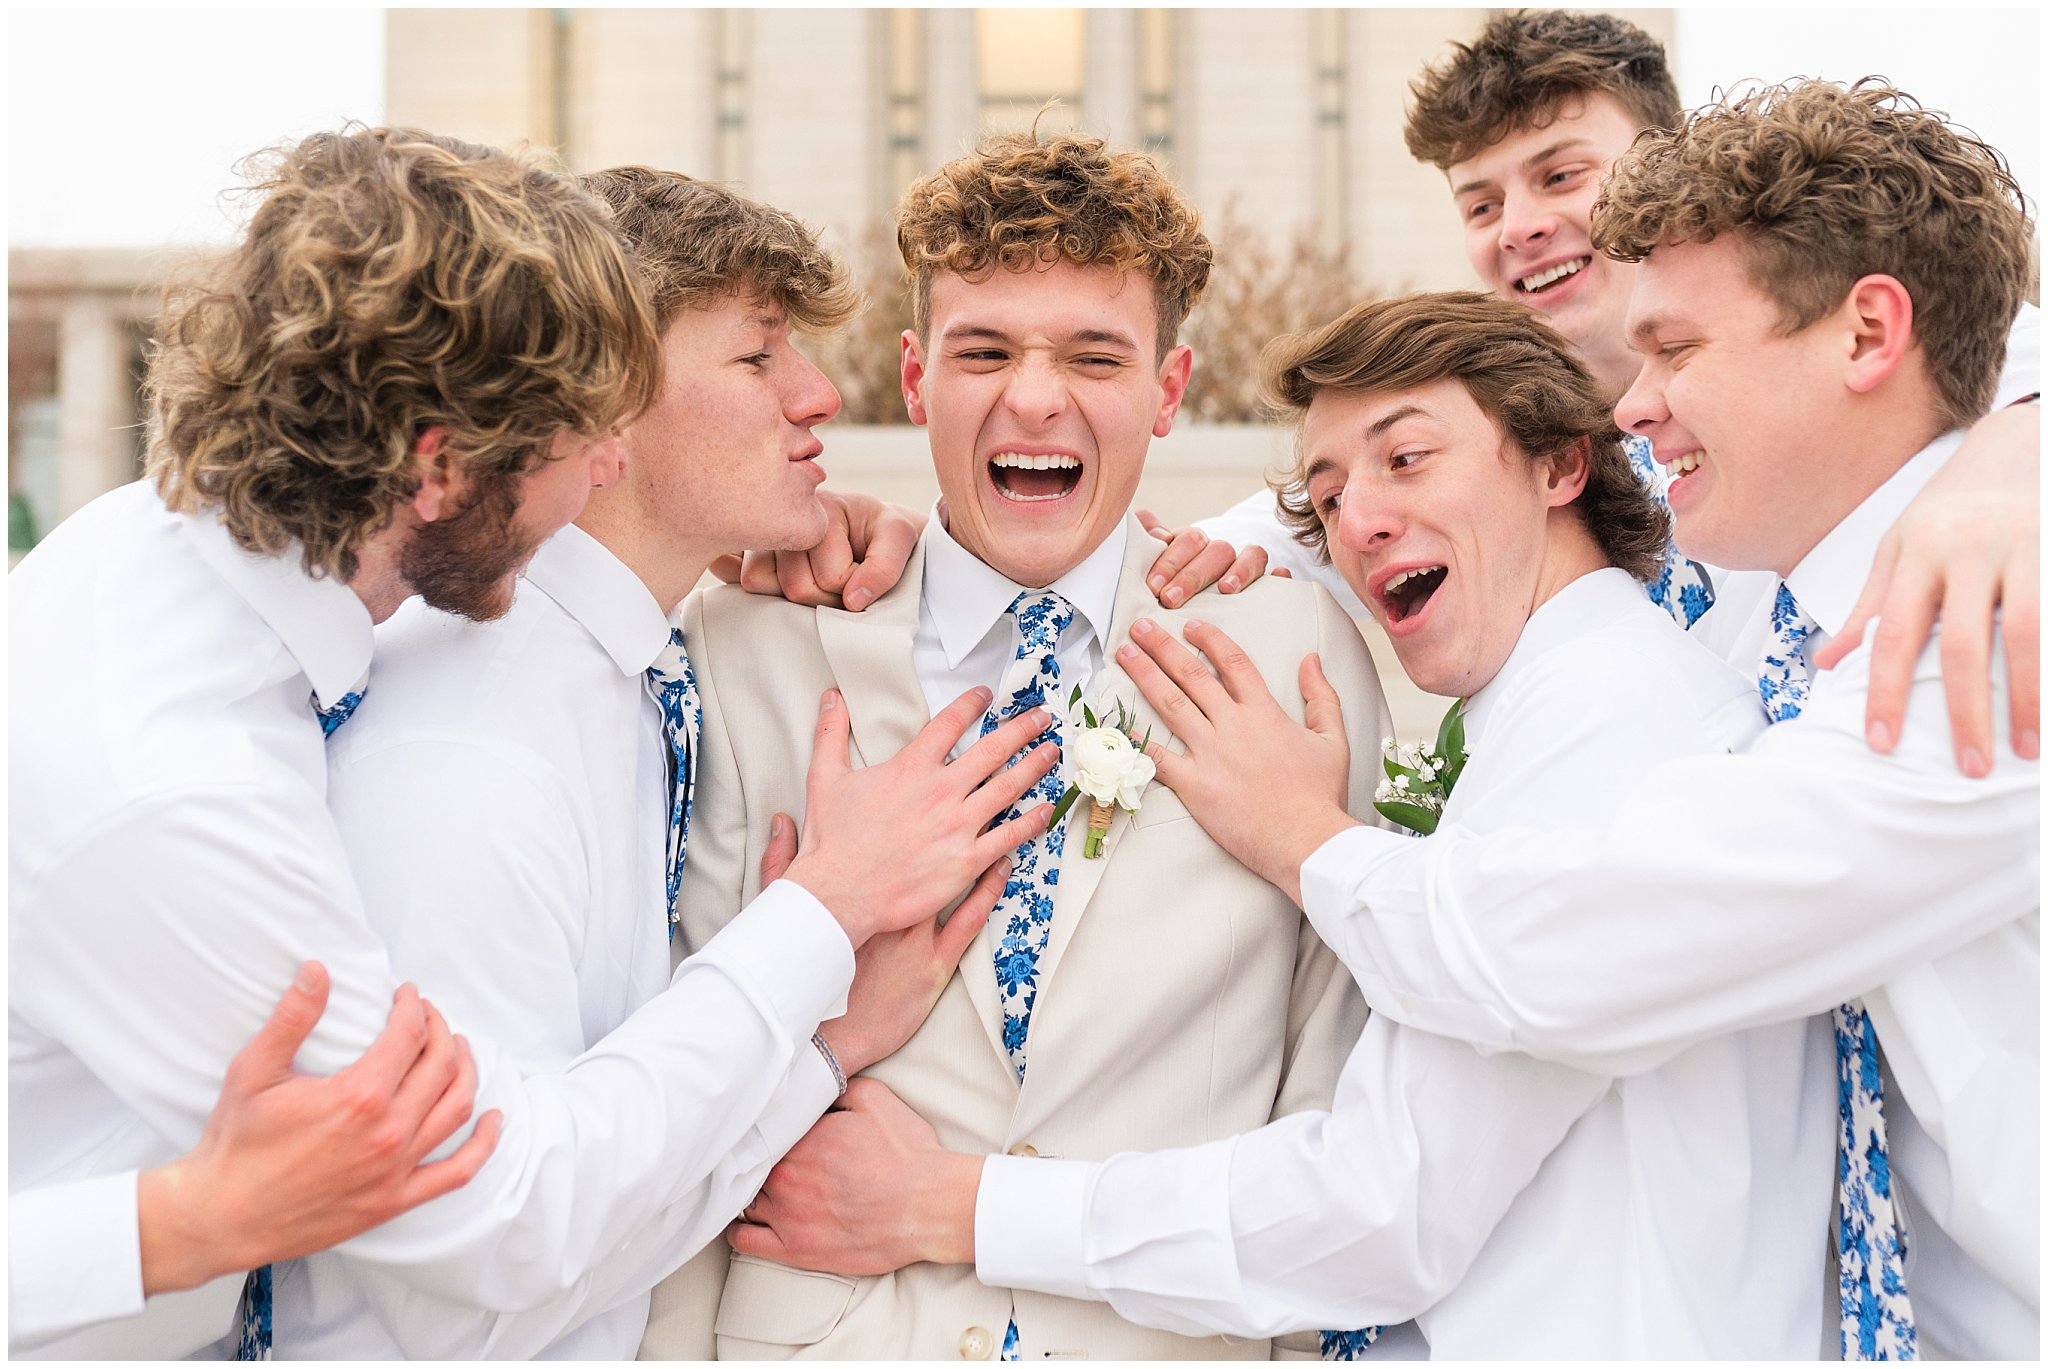 Groom surrounded by groomsmen candid moment | Oquirrh Mountain Temple and Draper Day Barn Winter Wedding | Jessie and Dallin Photography